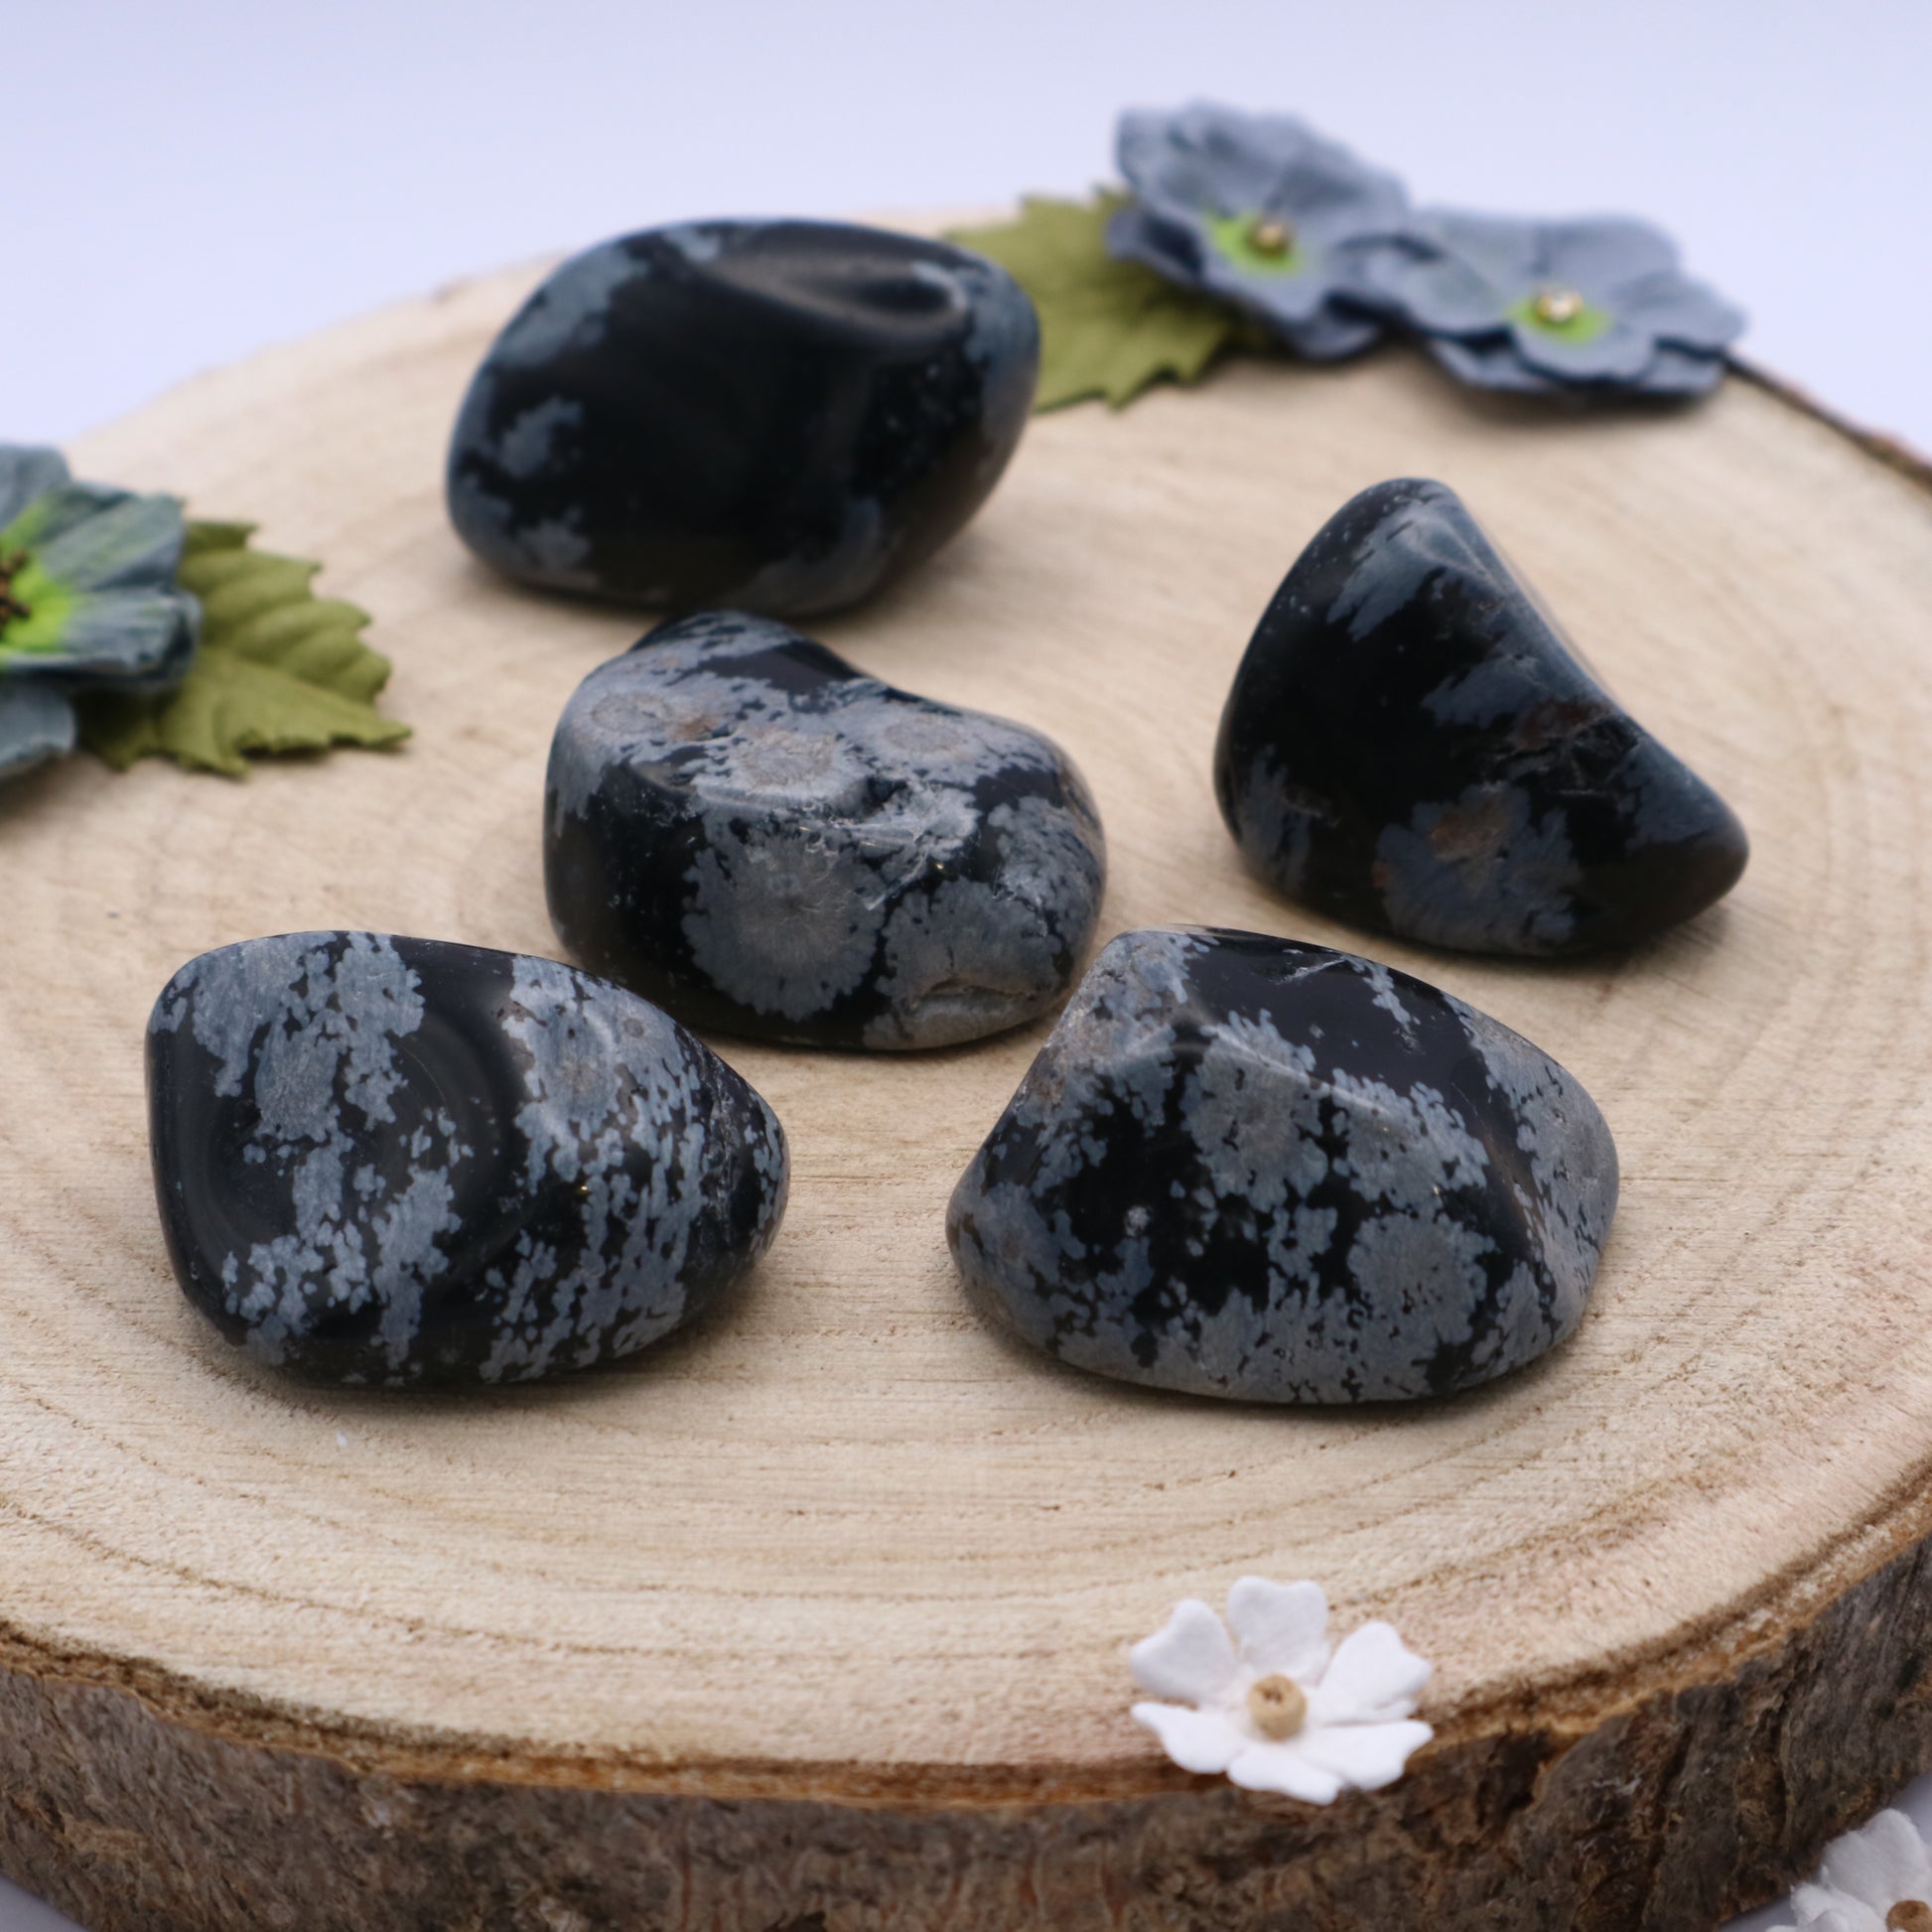 Five pieces of Snowflake Obsidian crystals